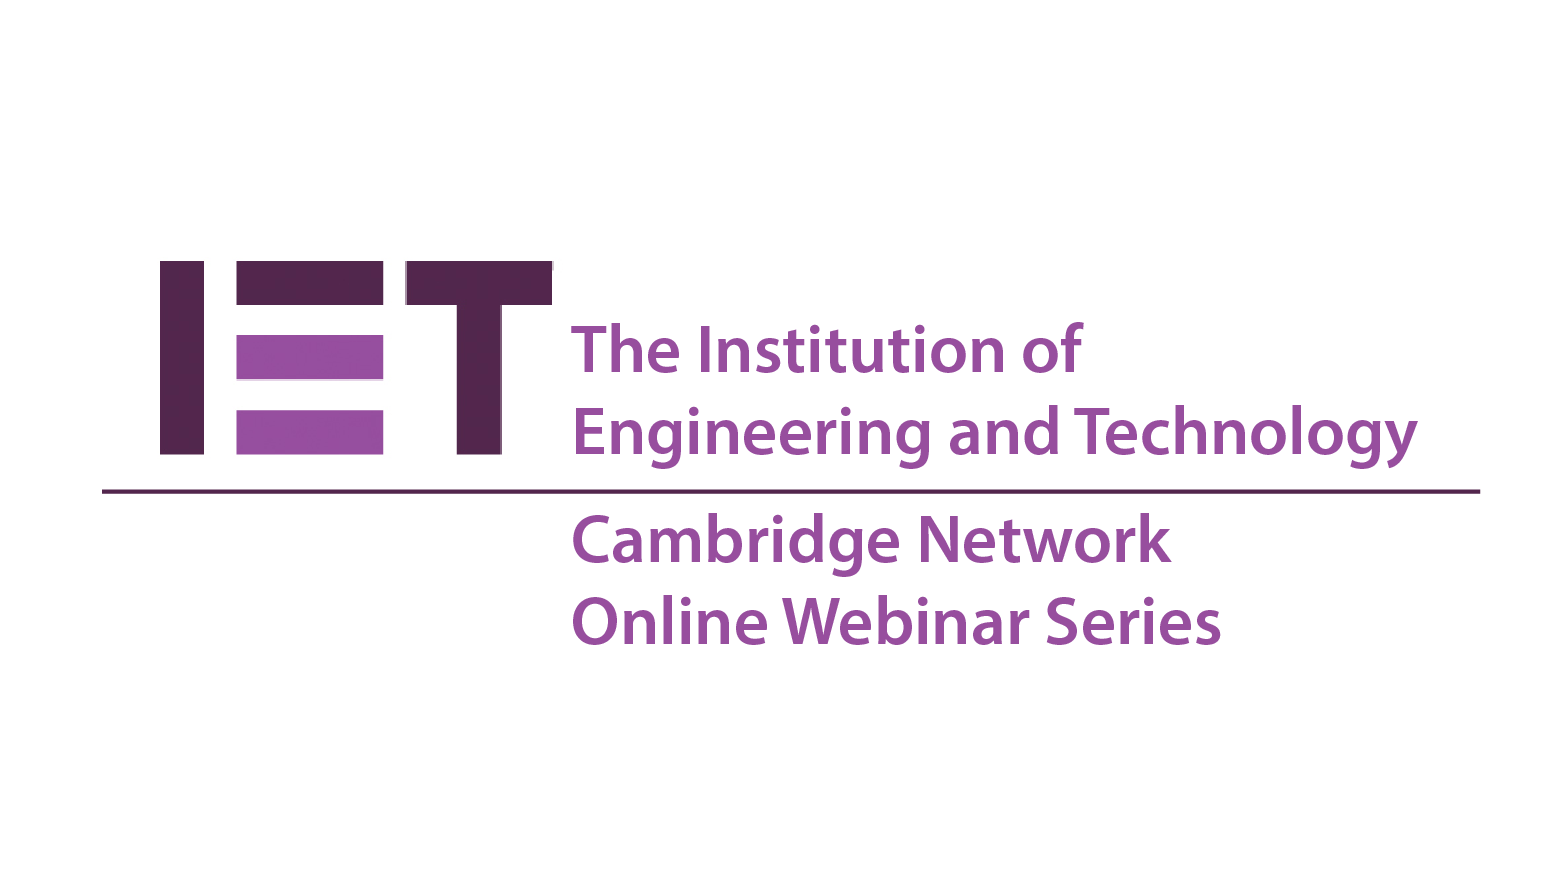 The Institution of Engineering and Technology Cambridge Network Online Webinar Series